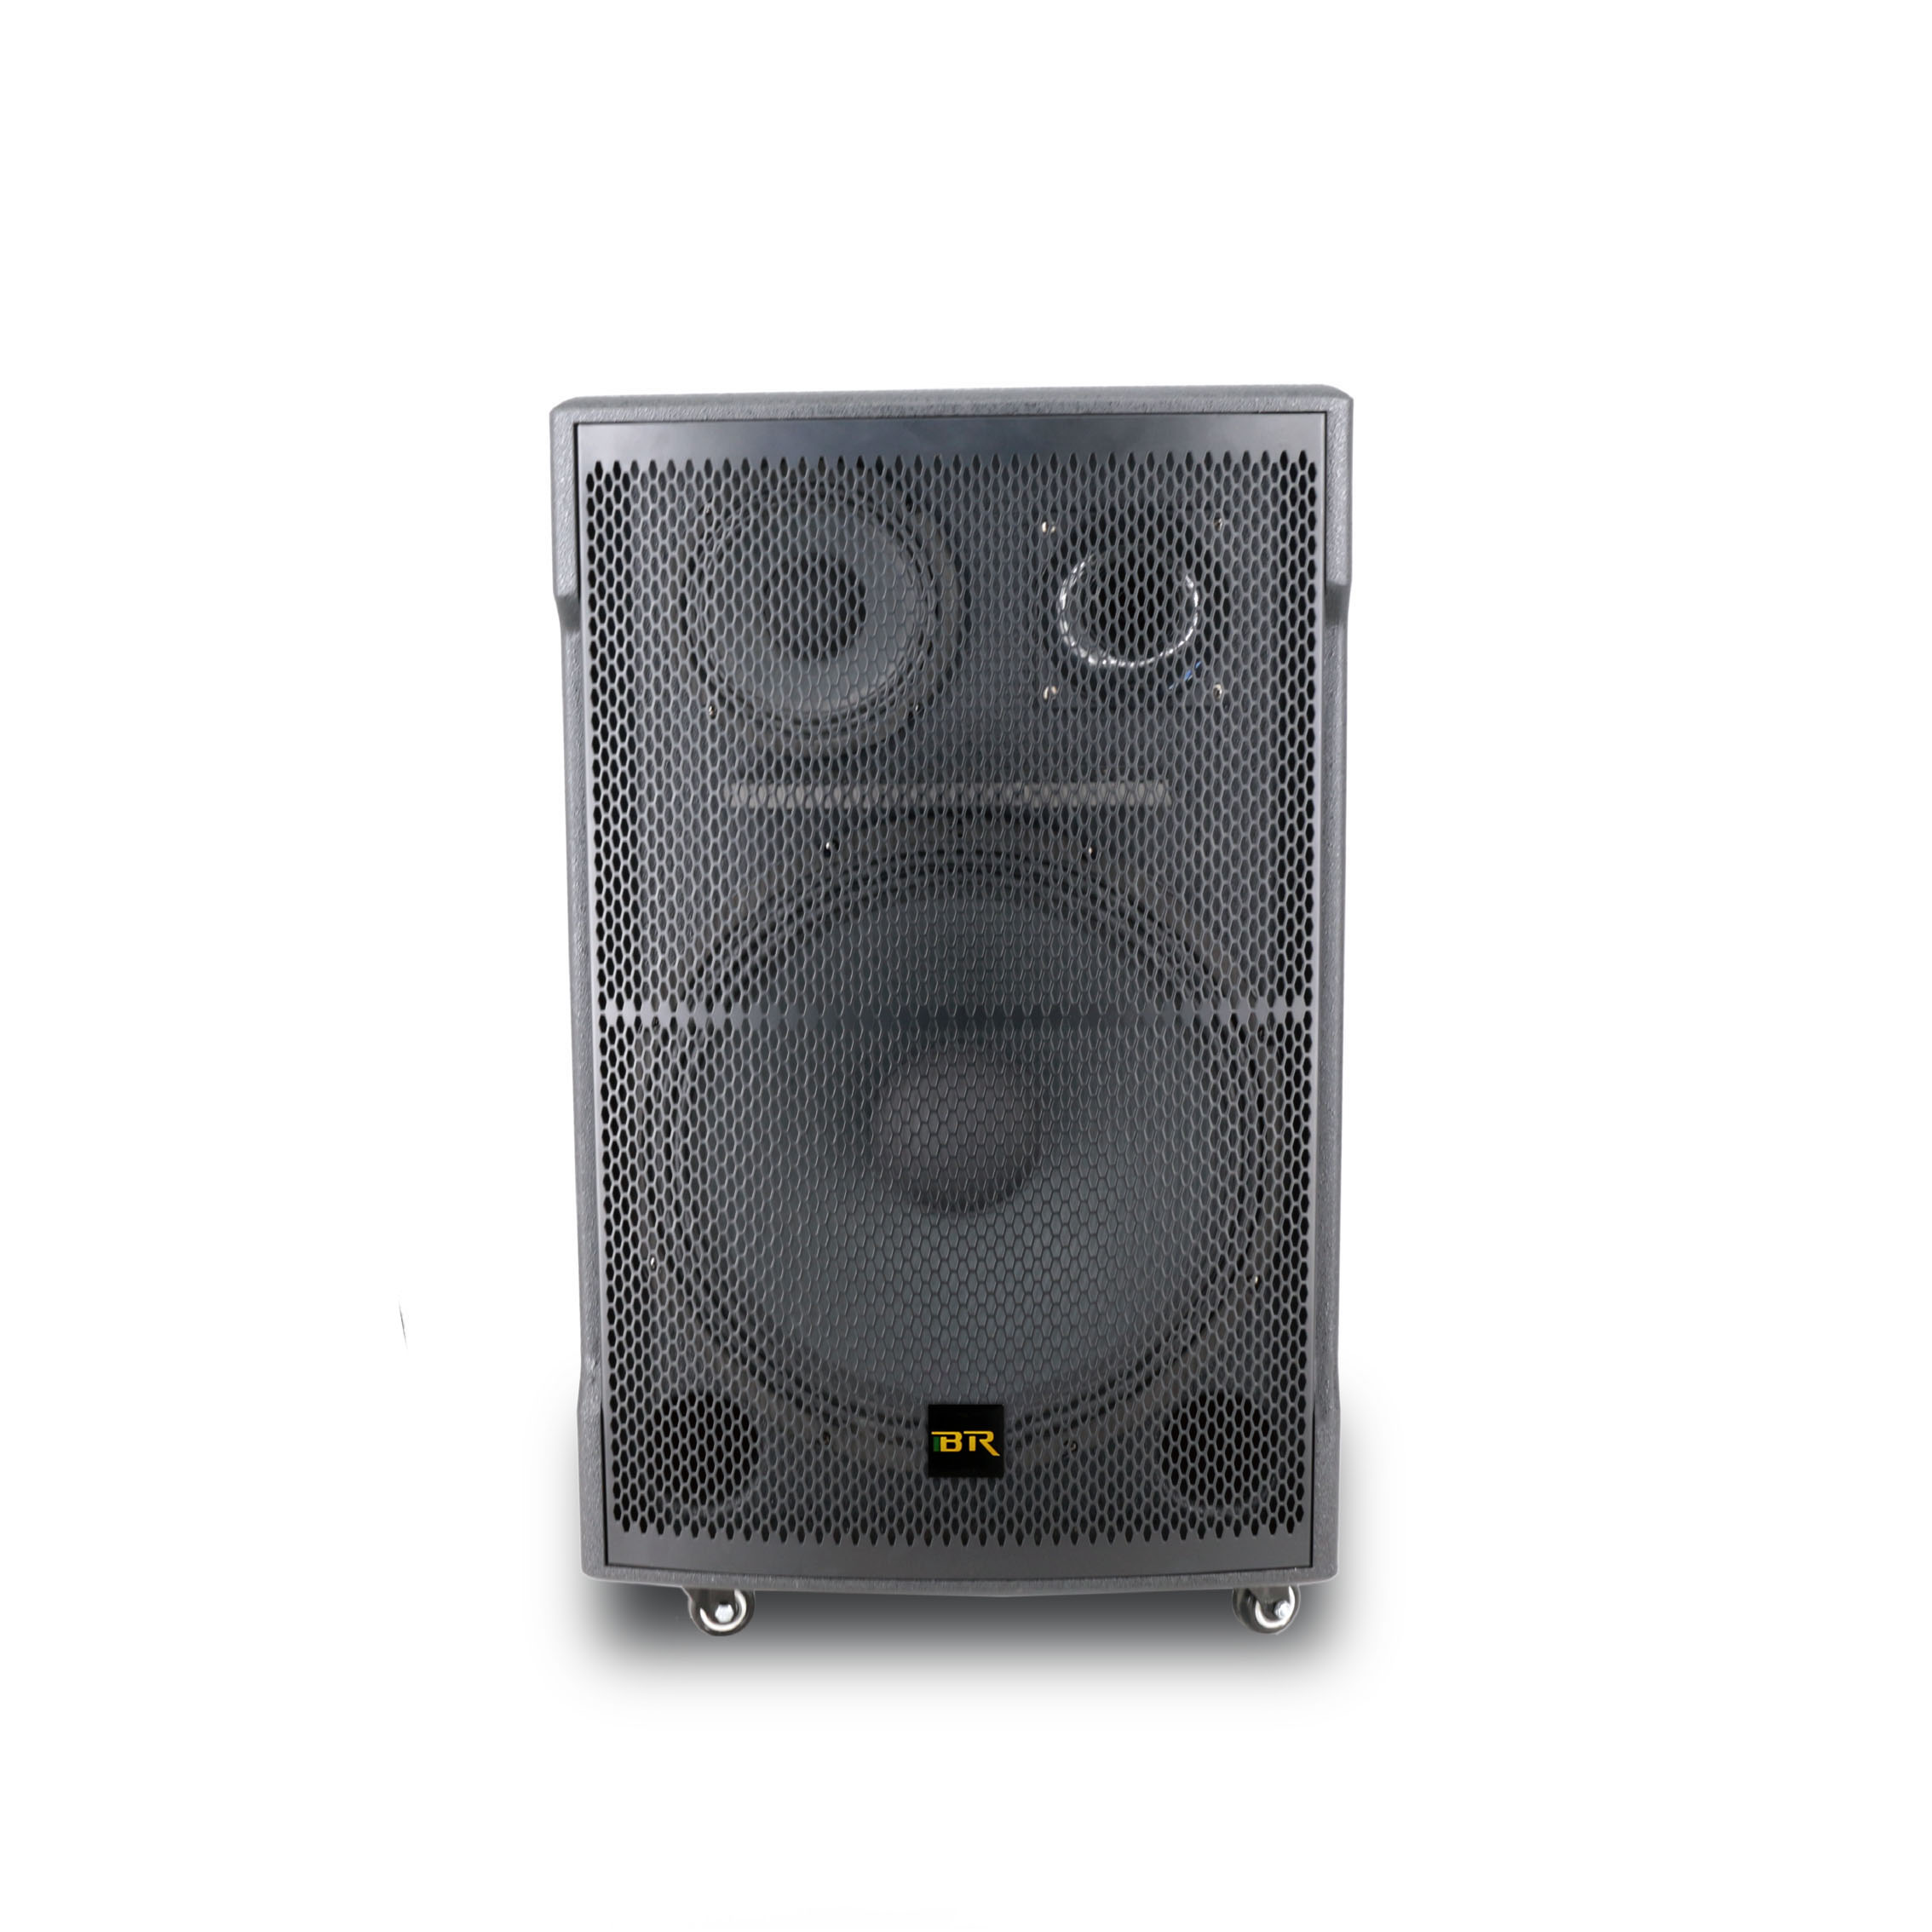 Tips To Choosing The Right Speaker Set For Your Needs